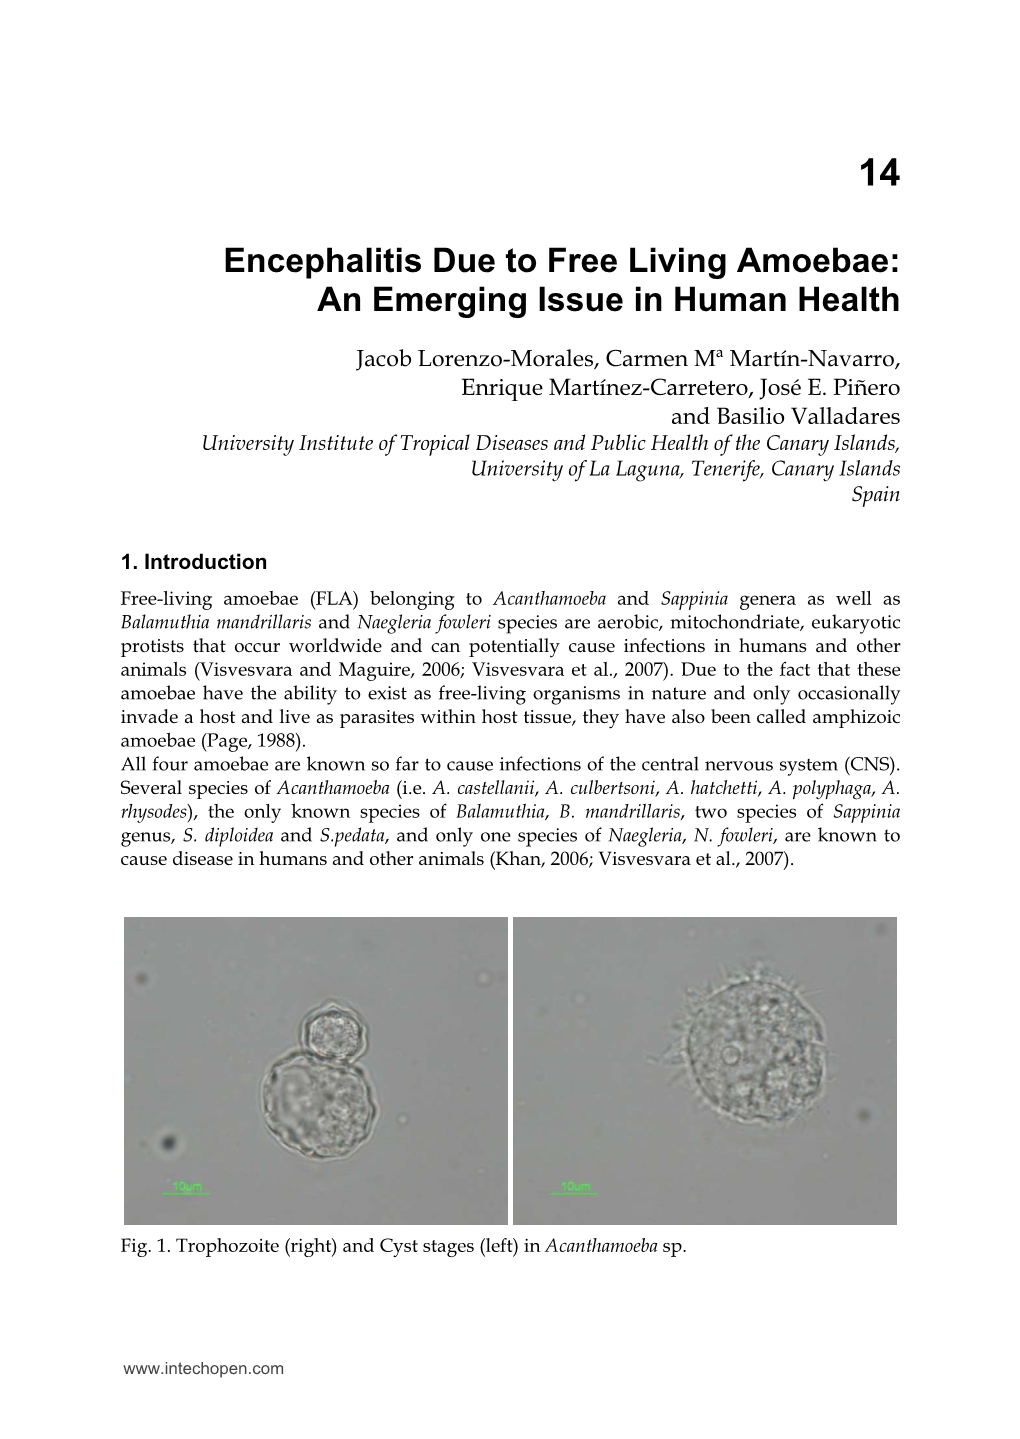 Encephalitis Due to Free Living Amoebae: an Emerging Issue in Human Health